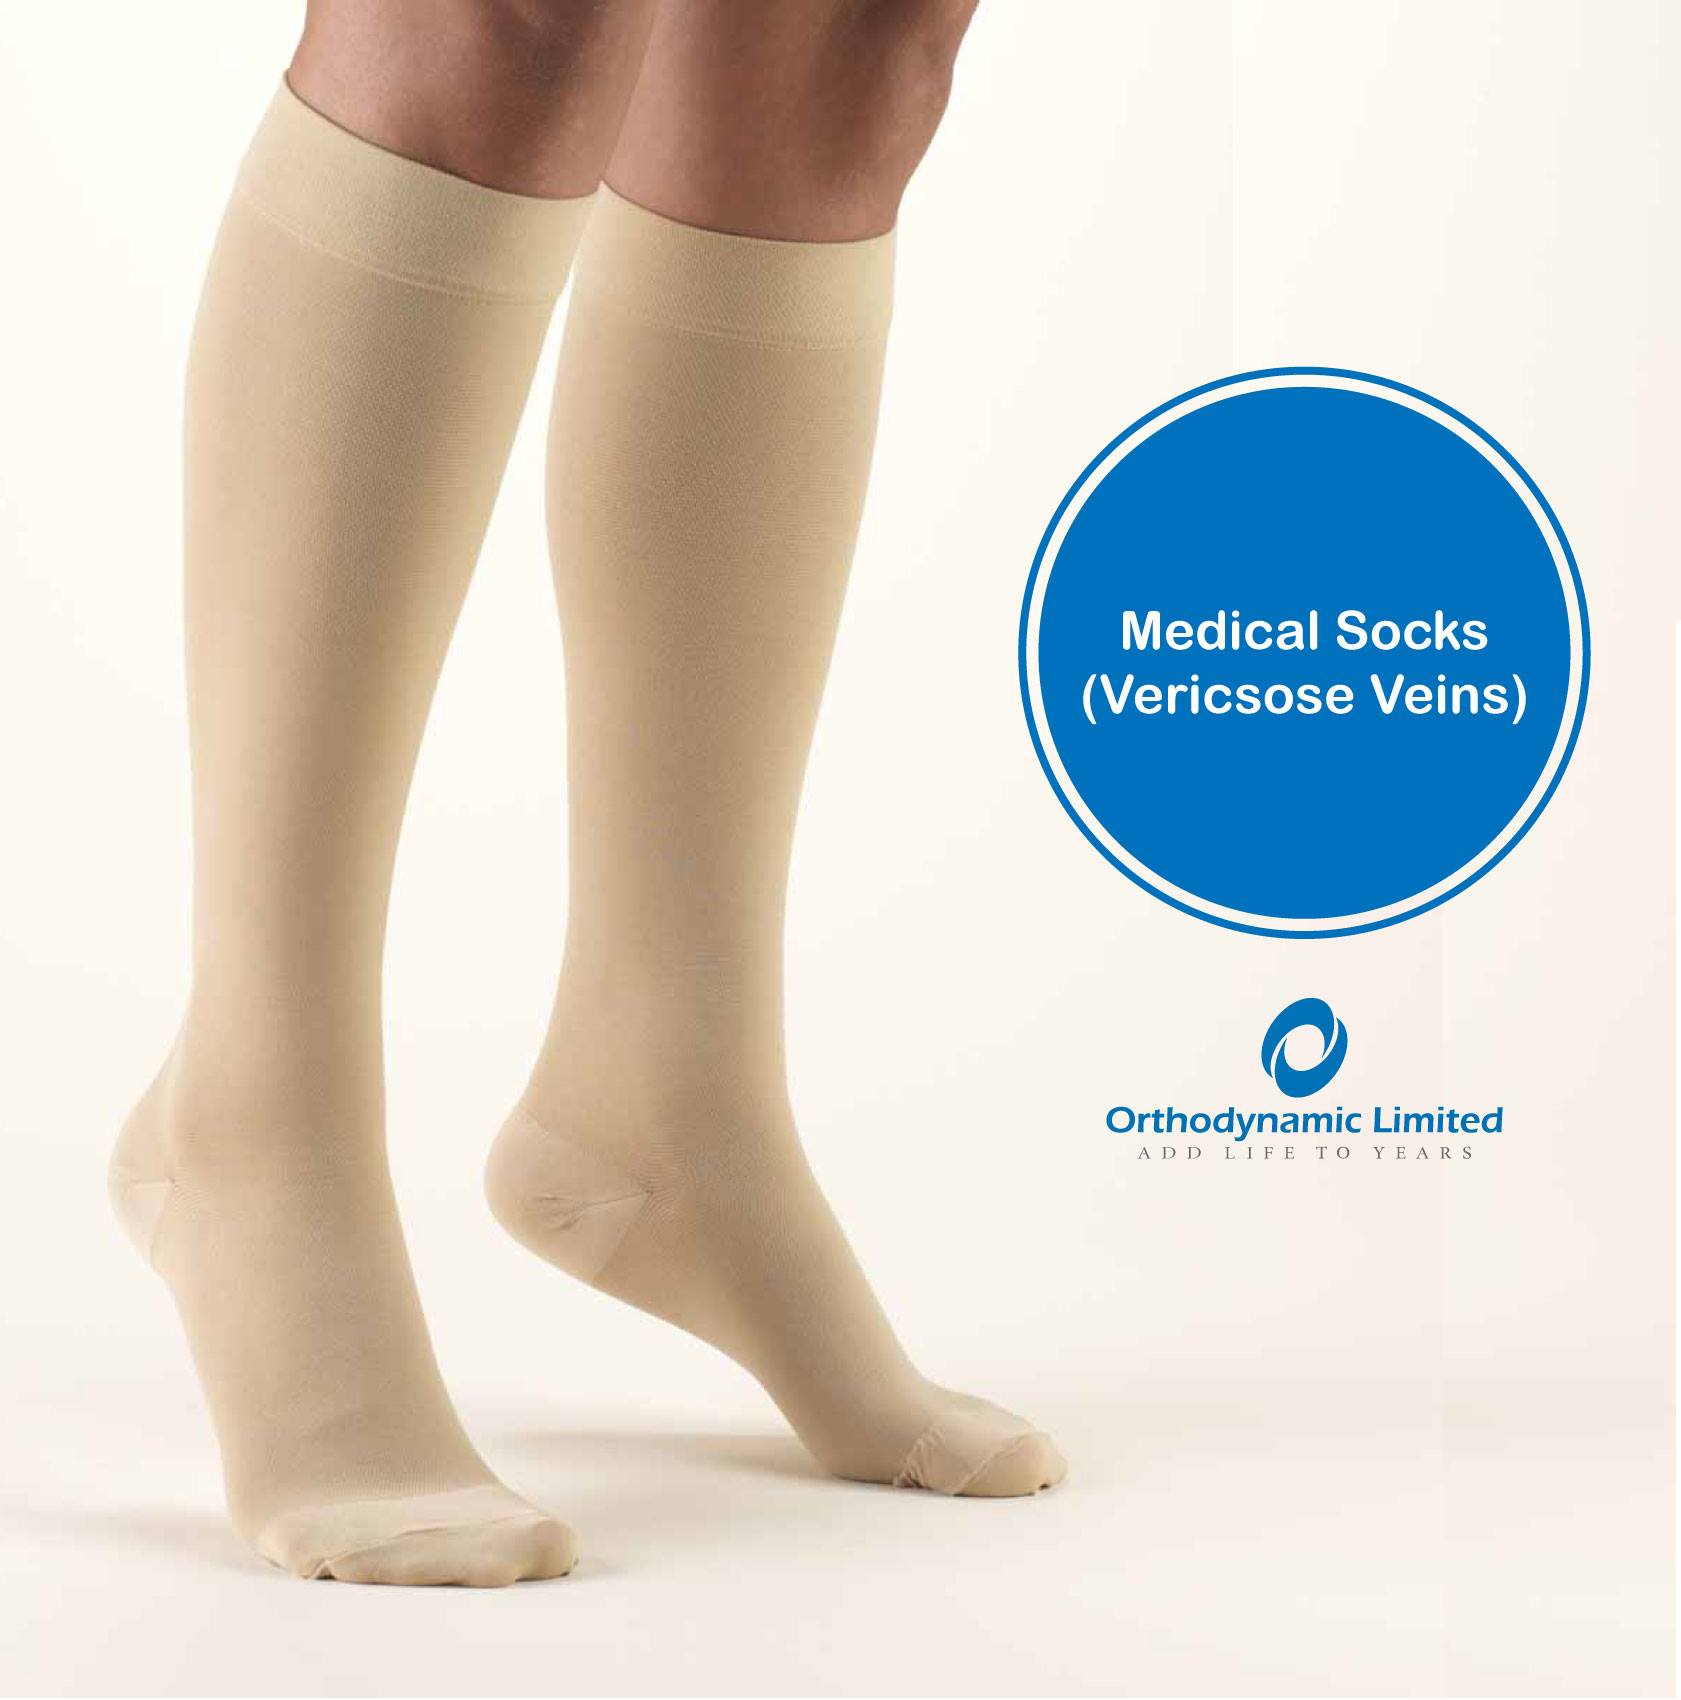 Comprezon Varicose Vein Stockings-Class 1-AF Knee Support - Buy